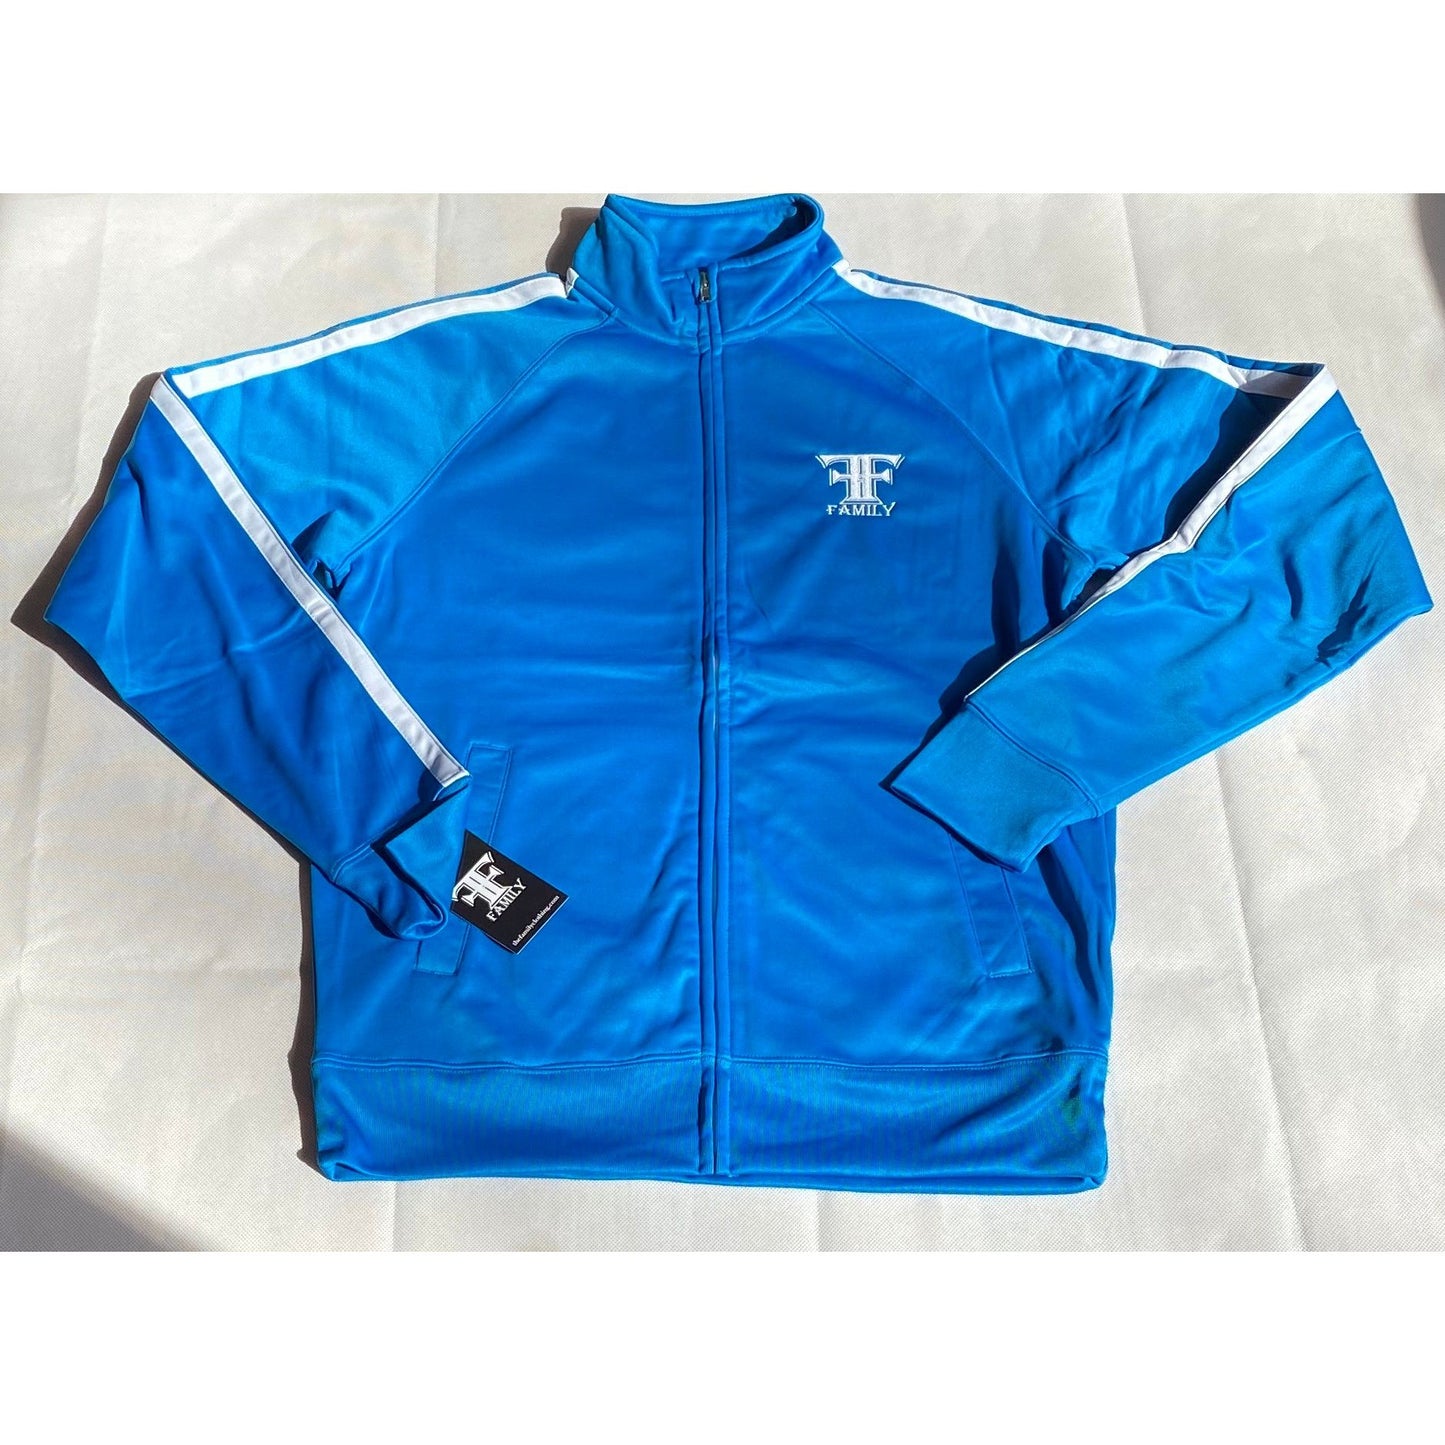 The Family adult unisex track jackets